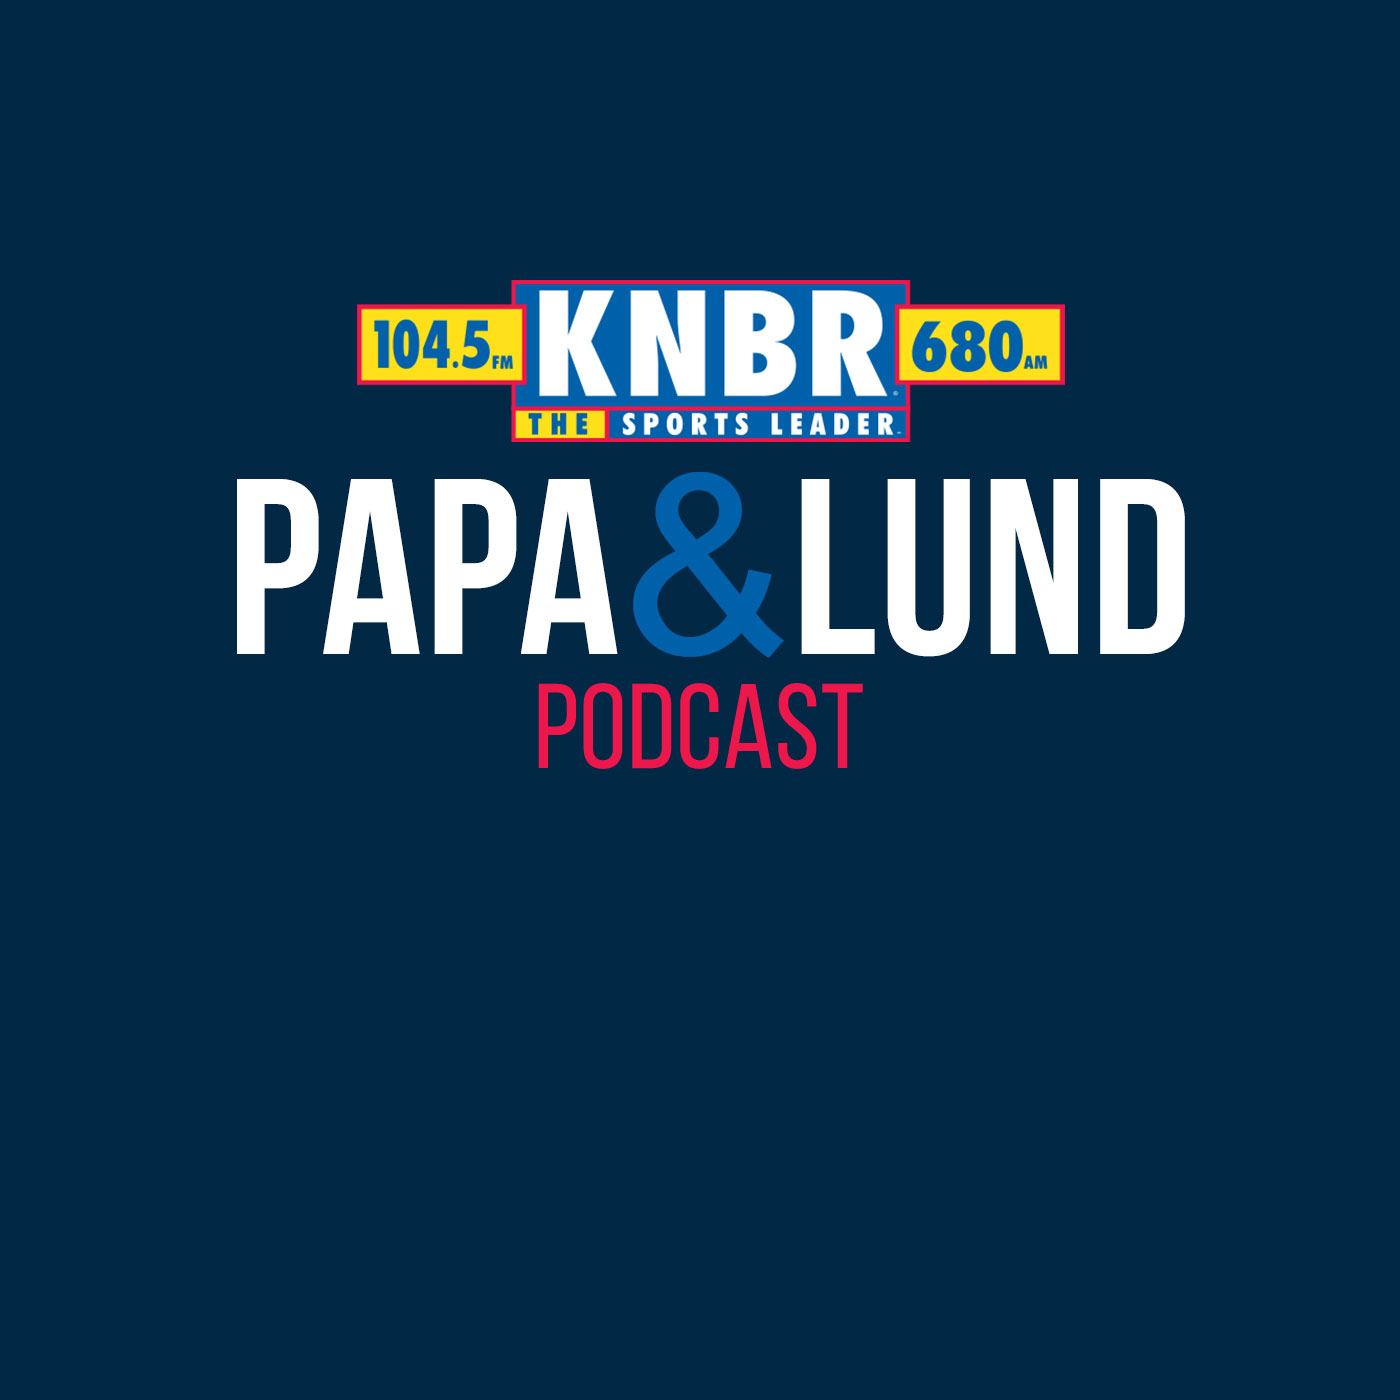 11-27 Ted Nguyen joins Papa & Lund to discuss how the 49ers and Eagles matchup up and what levels of the defense the 49ers offense can expose as the Battle for the NFC shifts to Philly this weekend